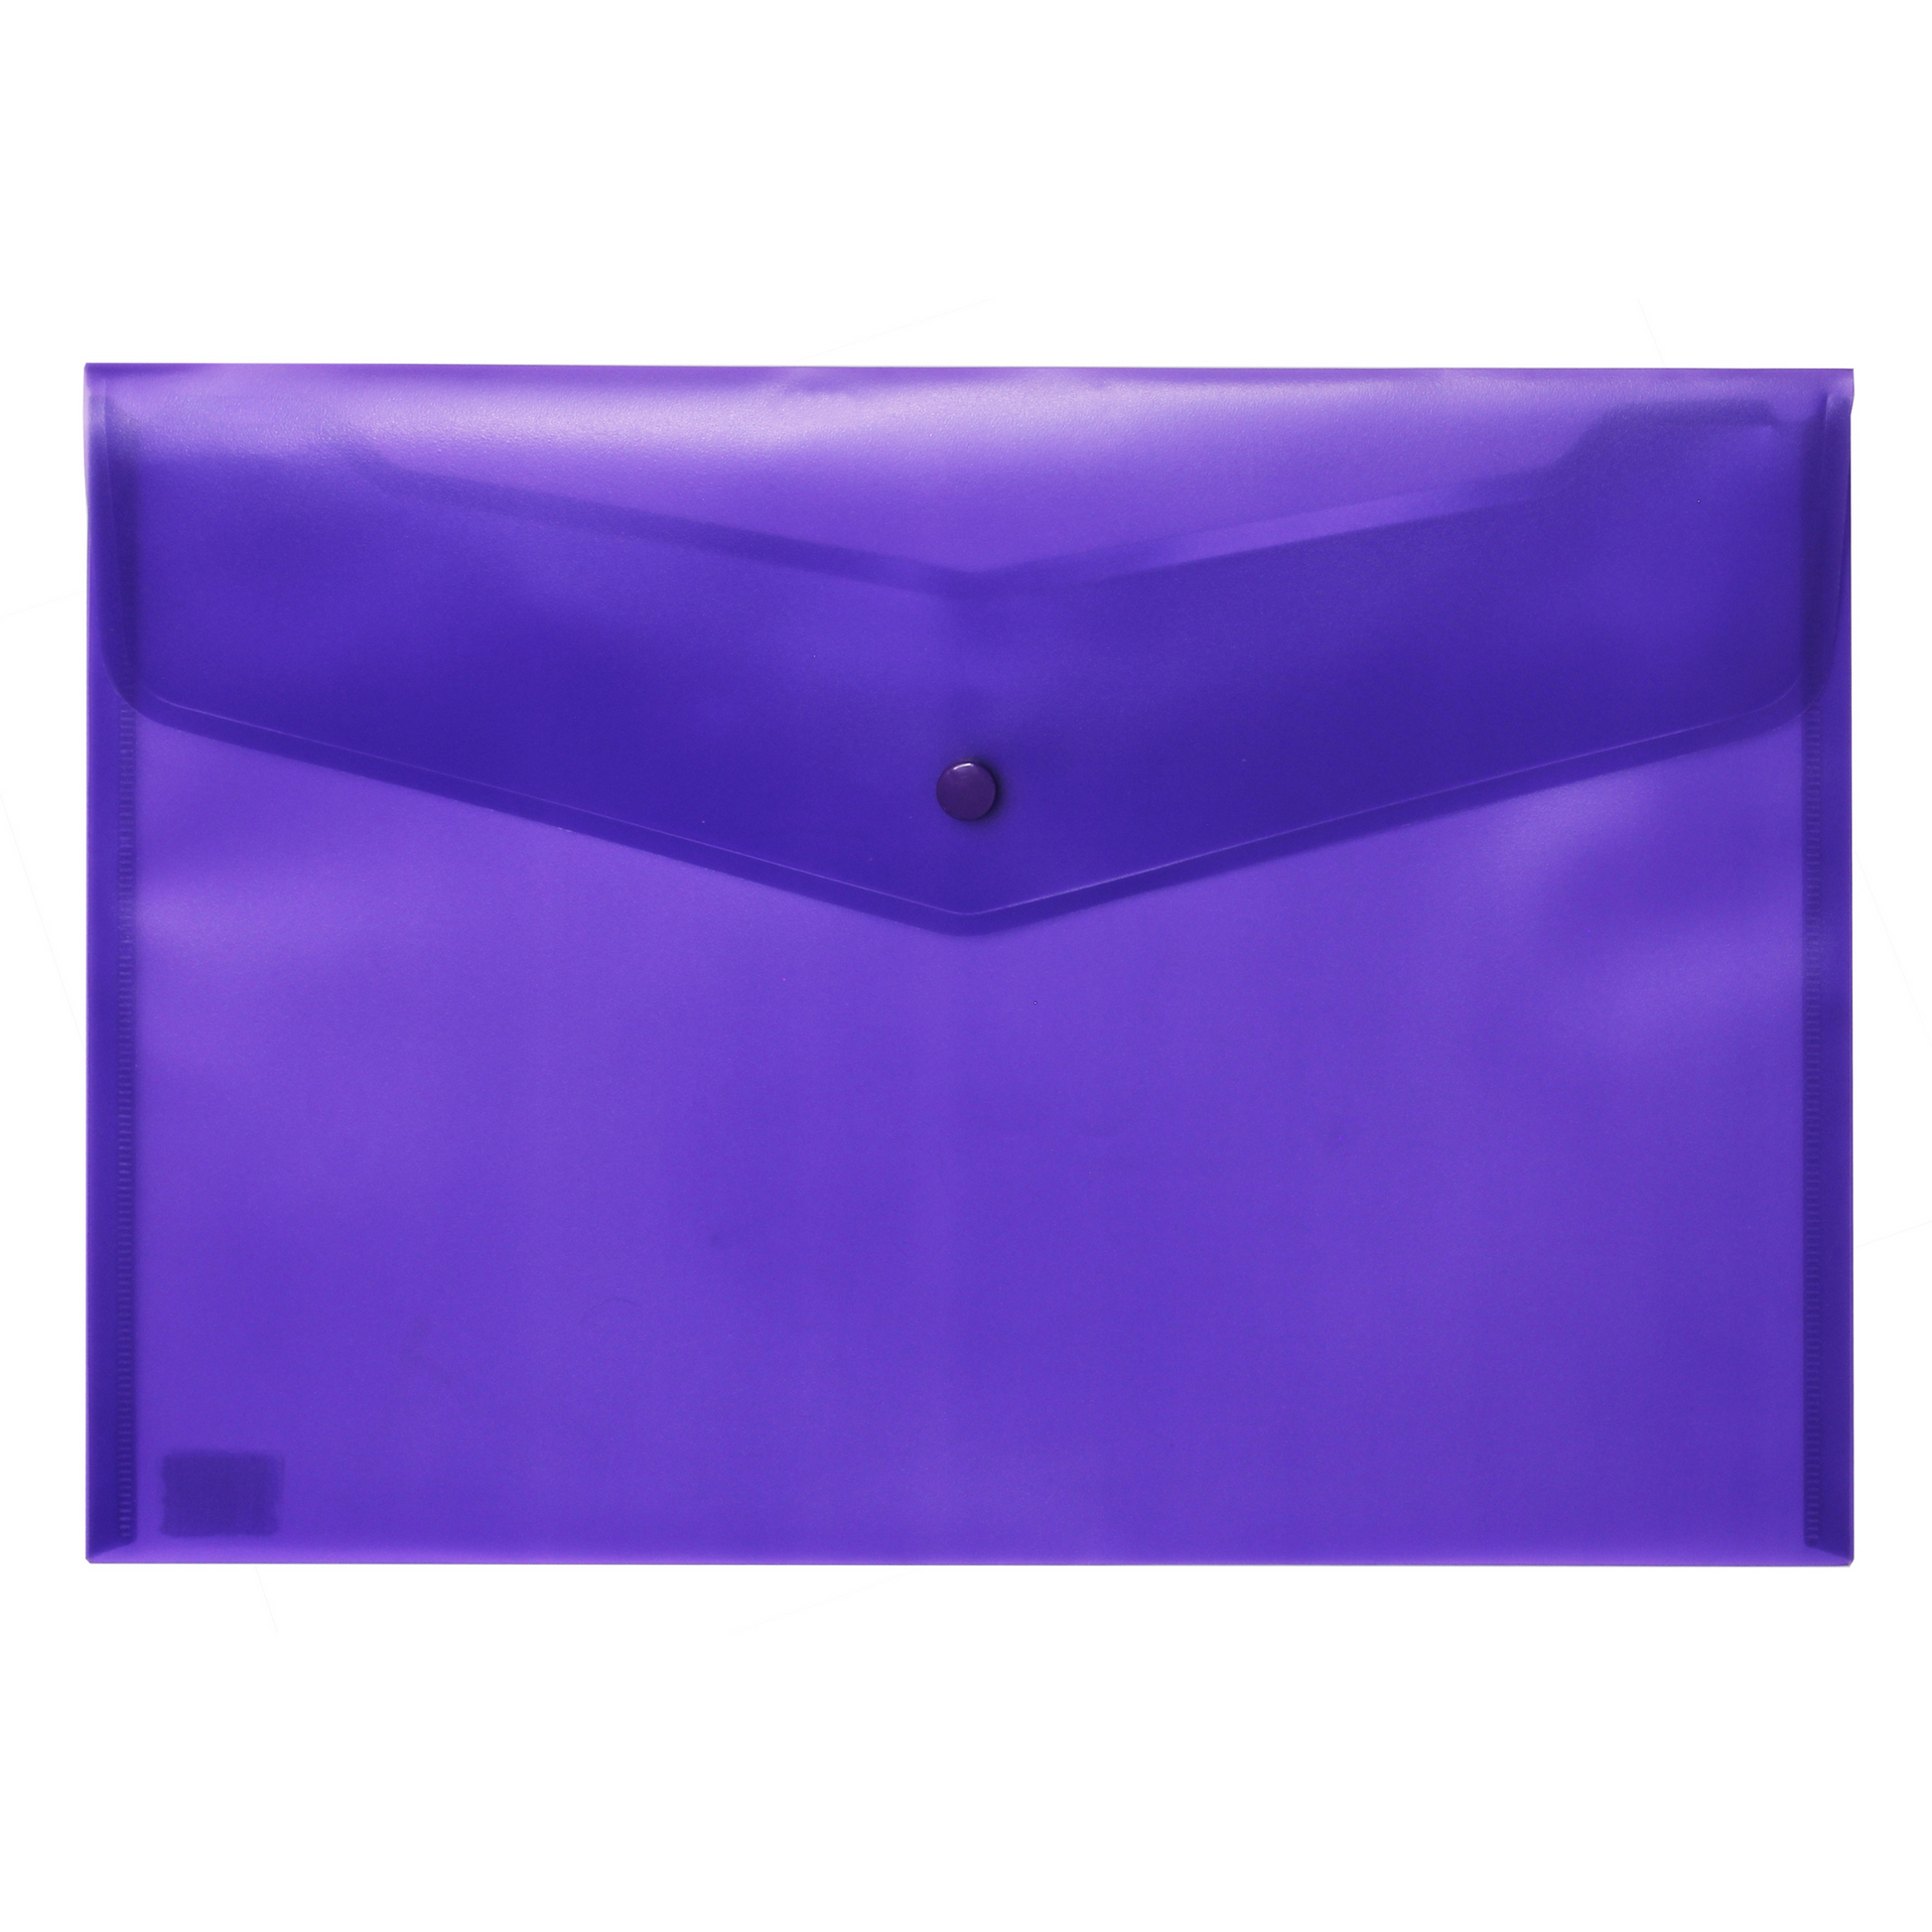 Vibrant purple A4-sized plastic stud wallet with a snap-button closure, displayed against a white background.